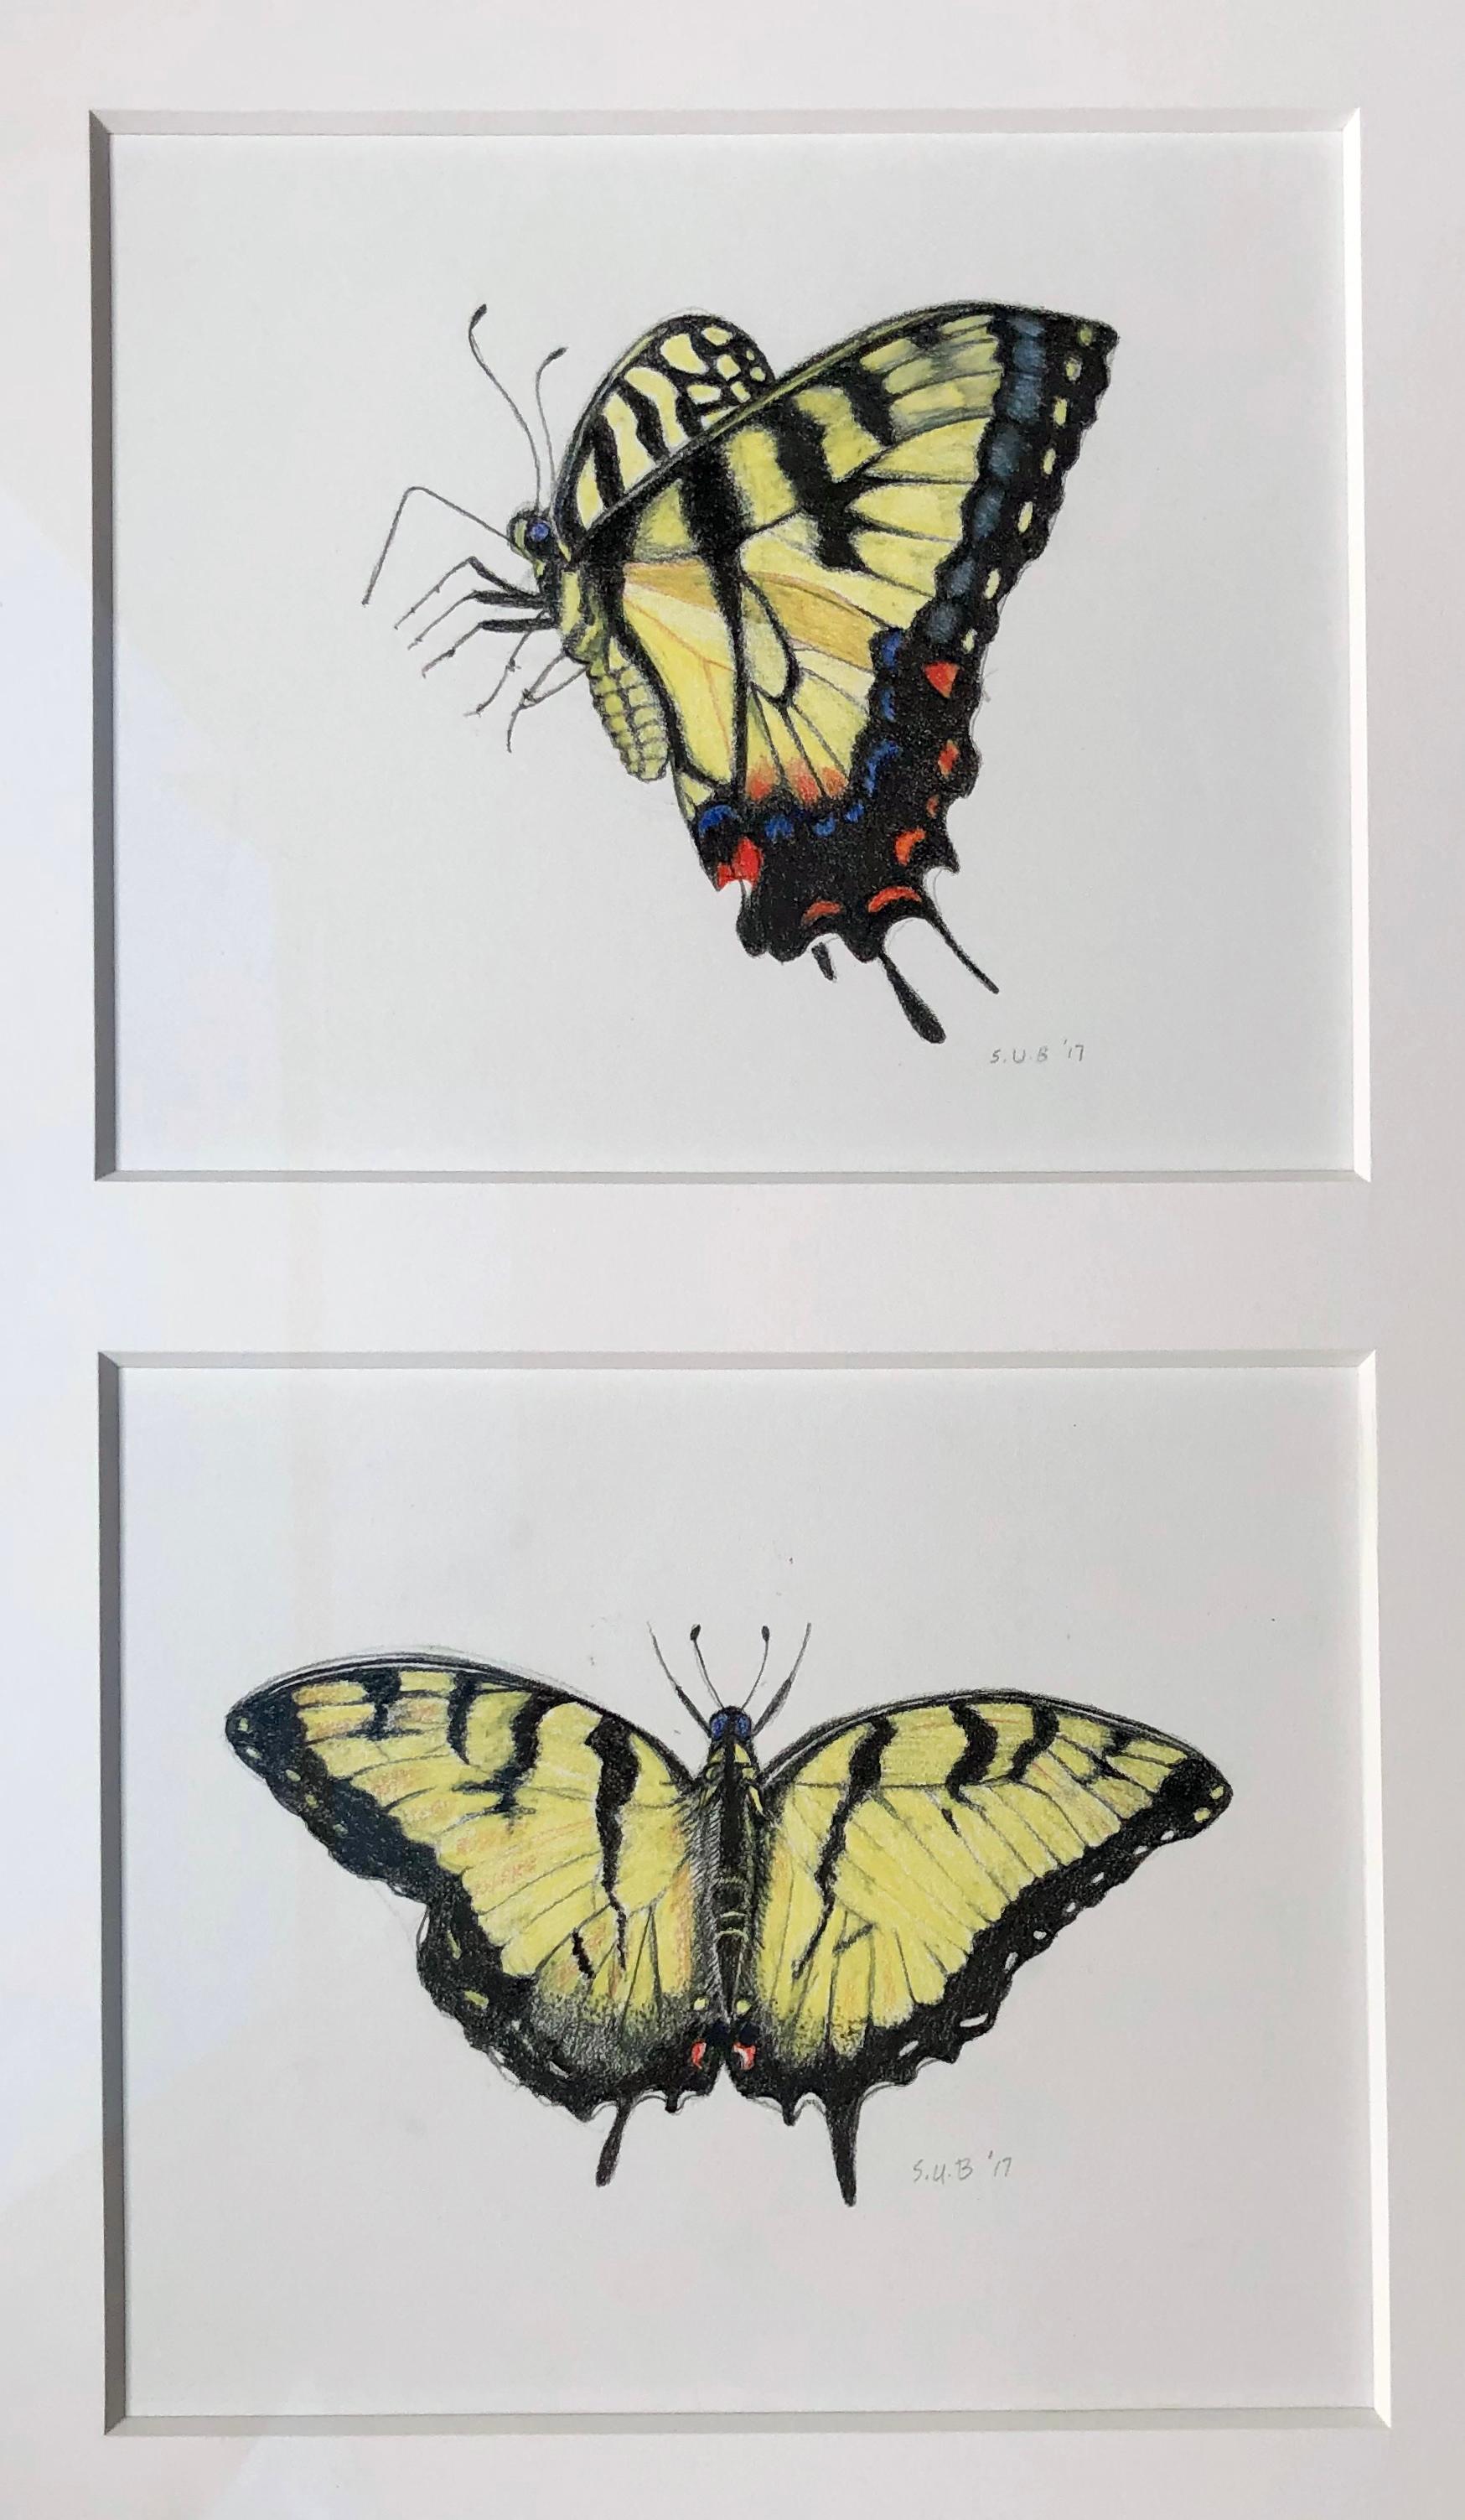 Reminiscent of John James Audubon specimen drawings, these two meticulously drawn swallow tail butterflies are matted separately and framed in a beautifully carved silver frame

Sylvia Beckman
Swallow Tails
colored pencil on paper
19H x 15.50W